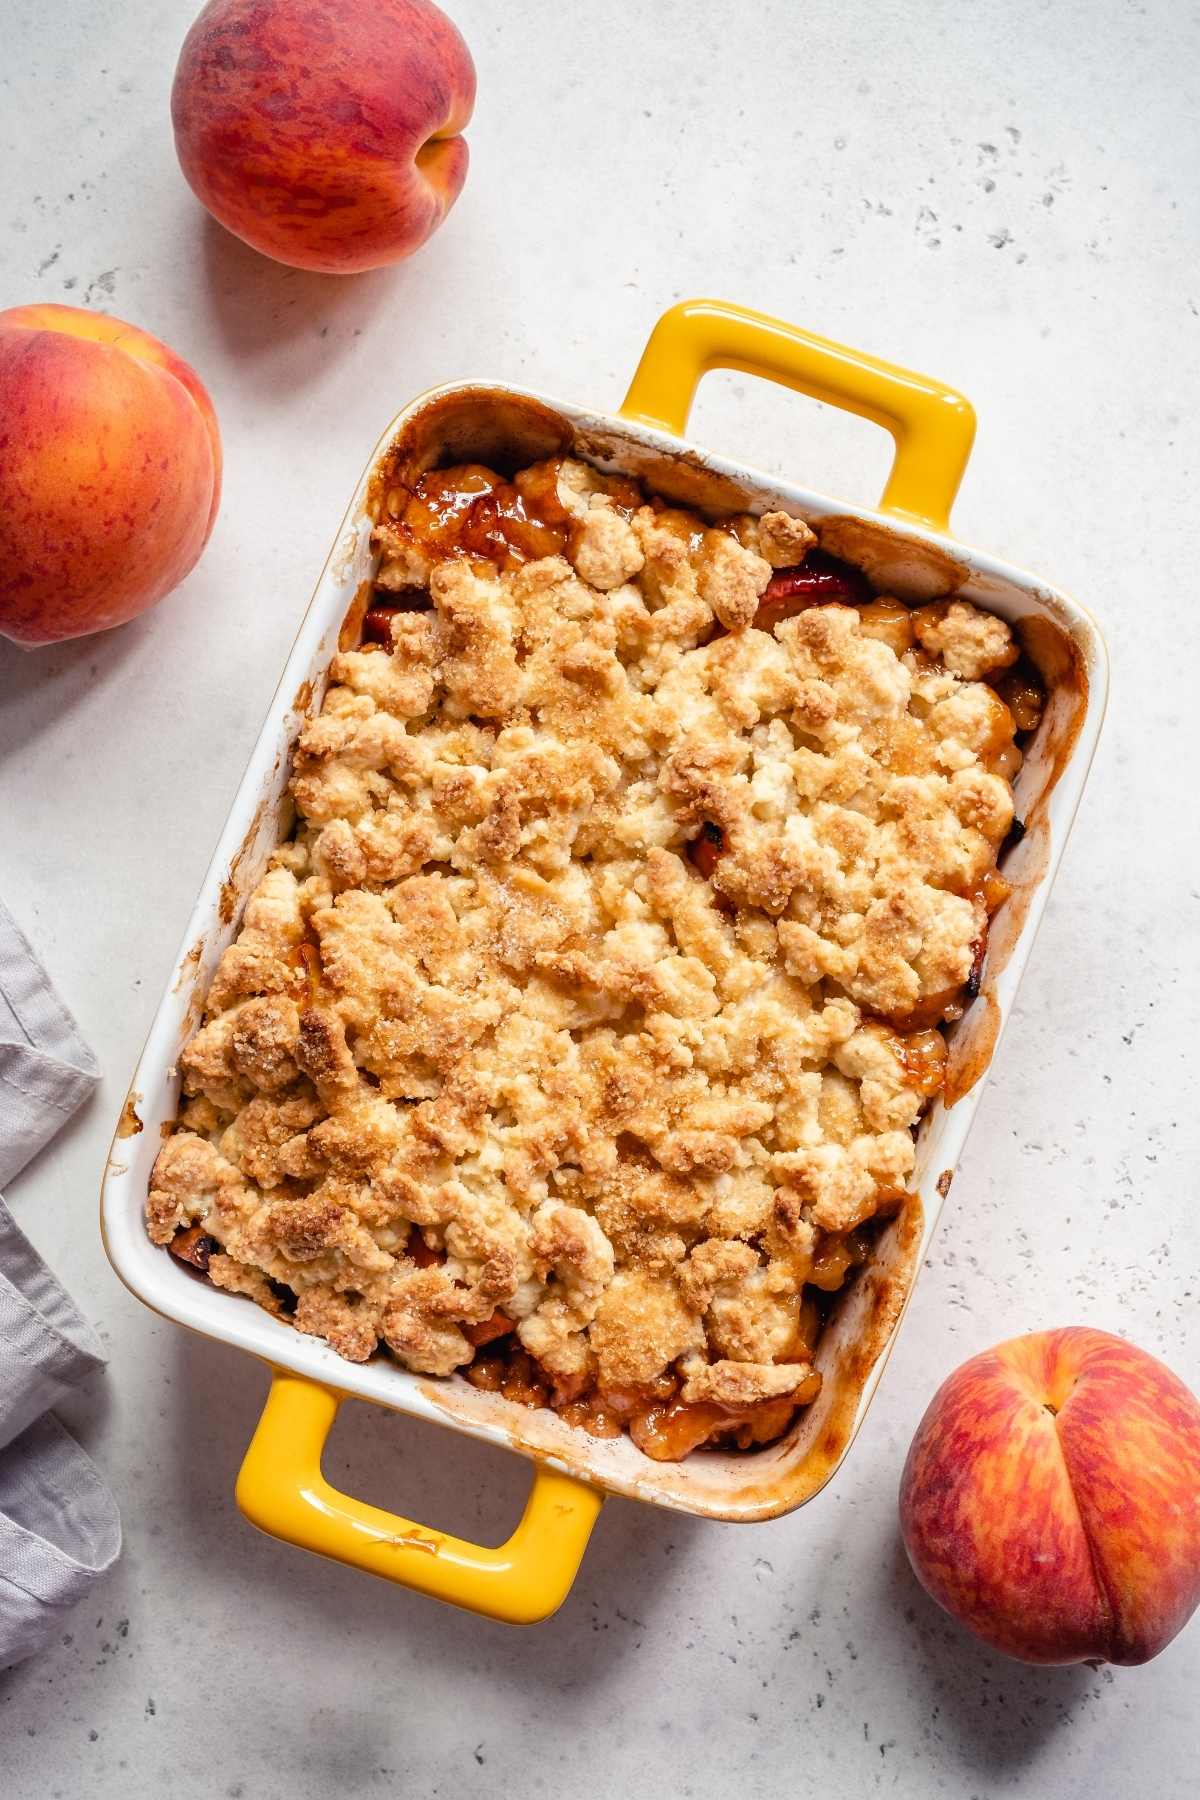 Peach Cobbler with Cake Mix